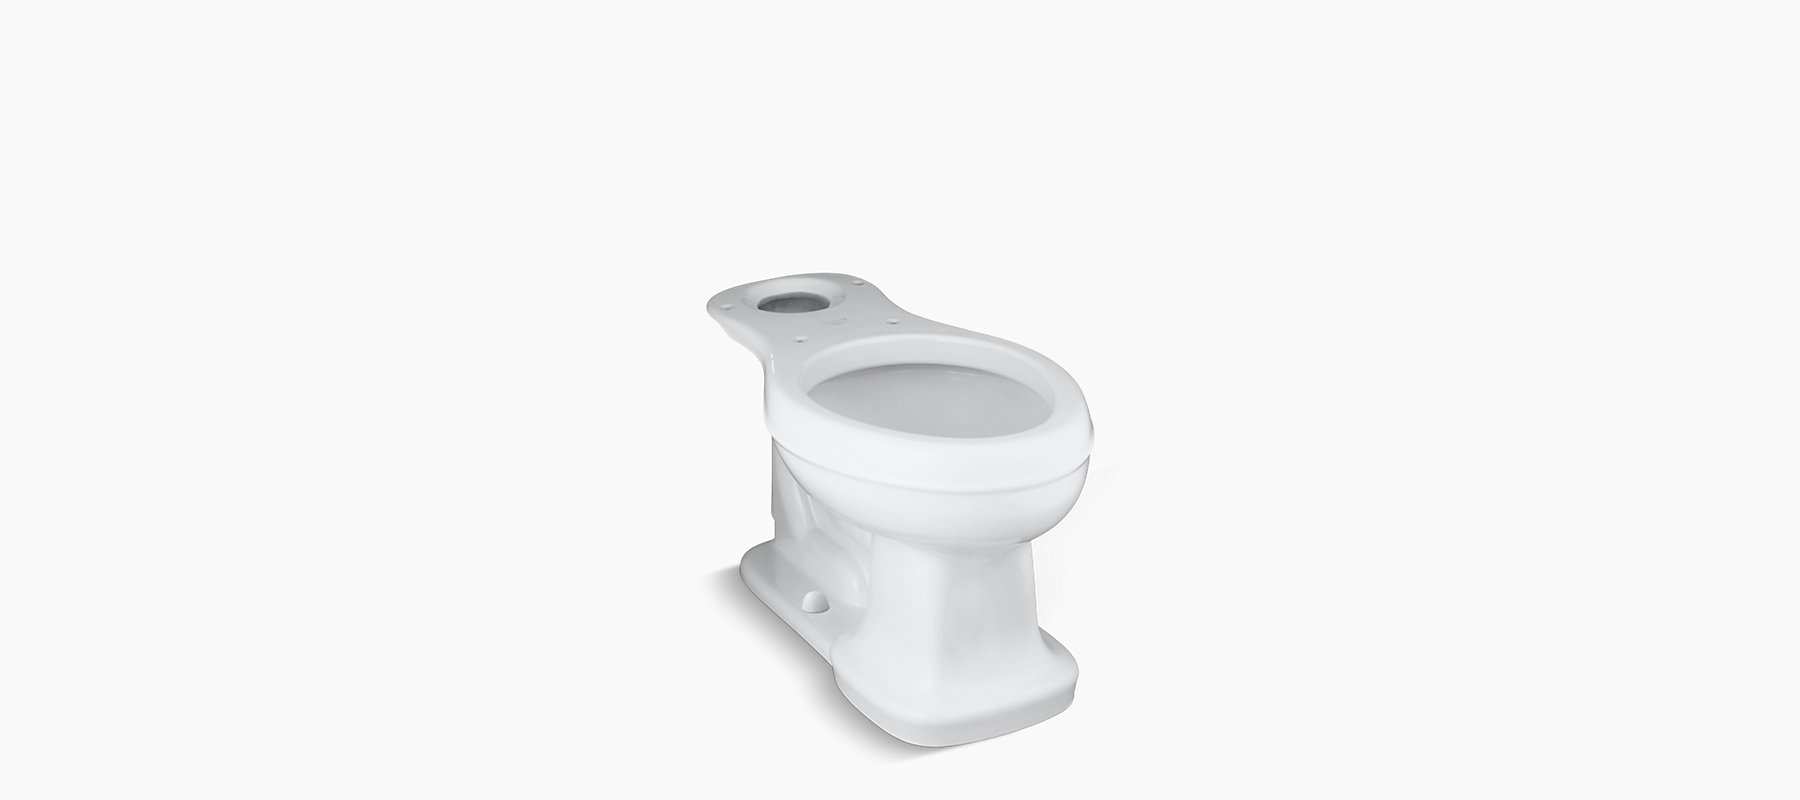 KOHLER Bancroft Comfort Height Elongated Toilet Bowl Only in Ice Grey Color NEW 